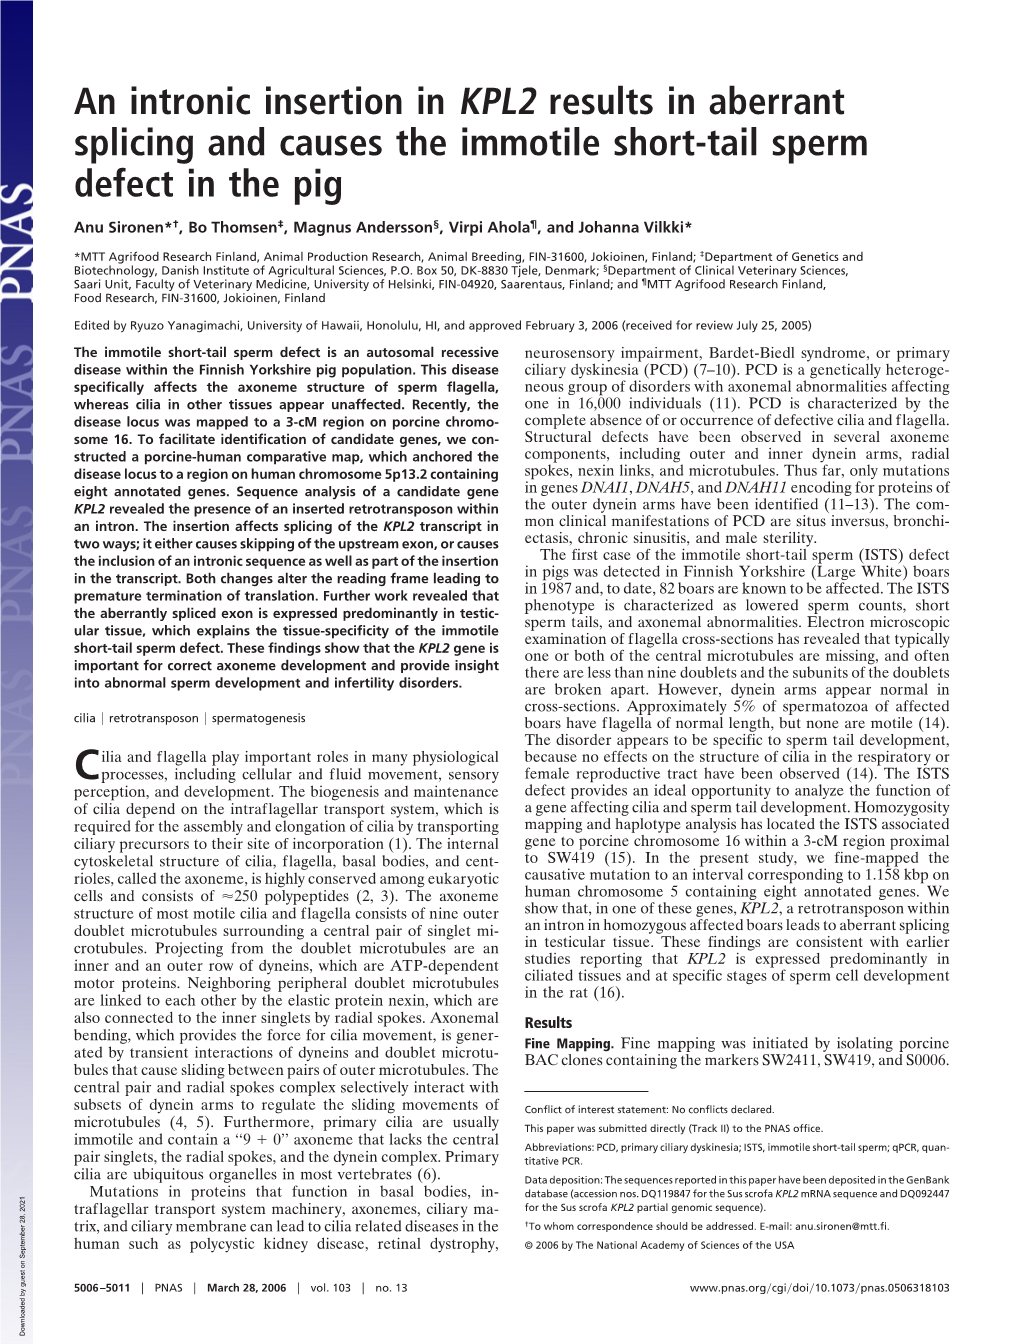 An Intronic Insertion in KPL2 Results in Aberrant Splicing and Causes the Immotile Short-Tail Sperm Defect in the Pig